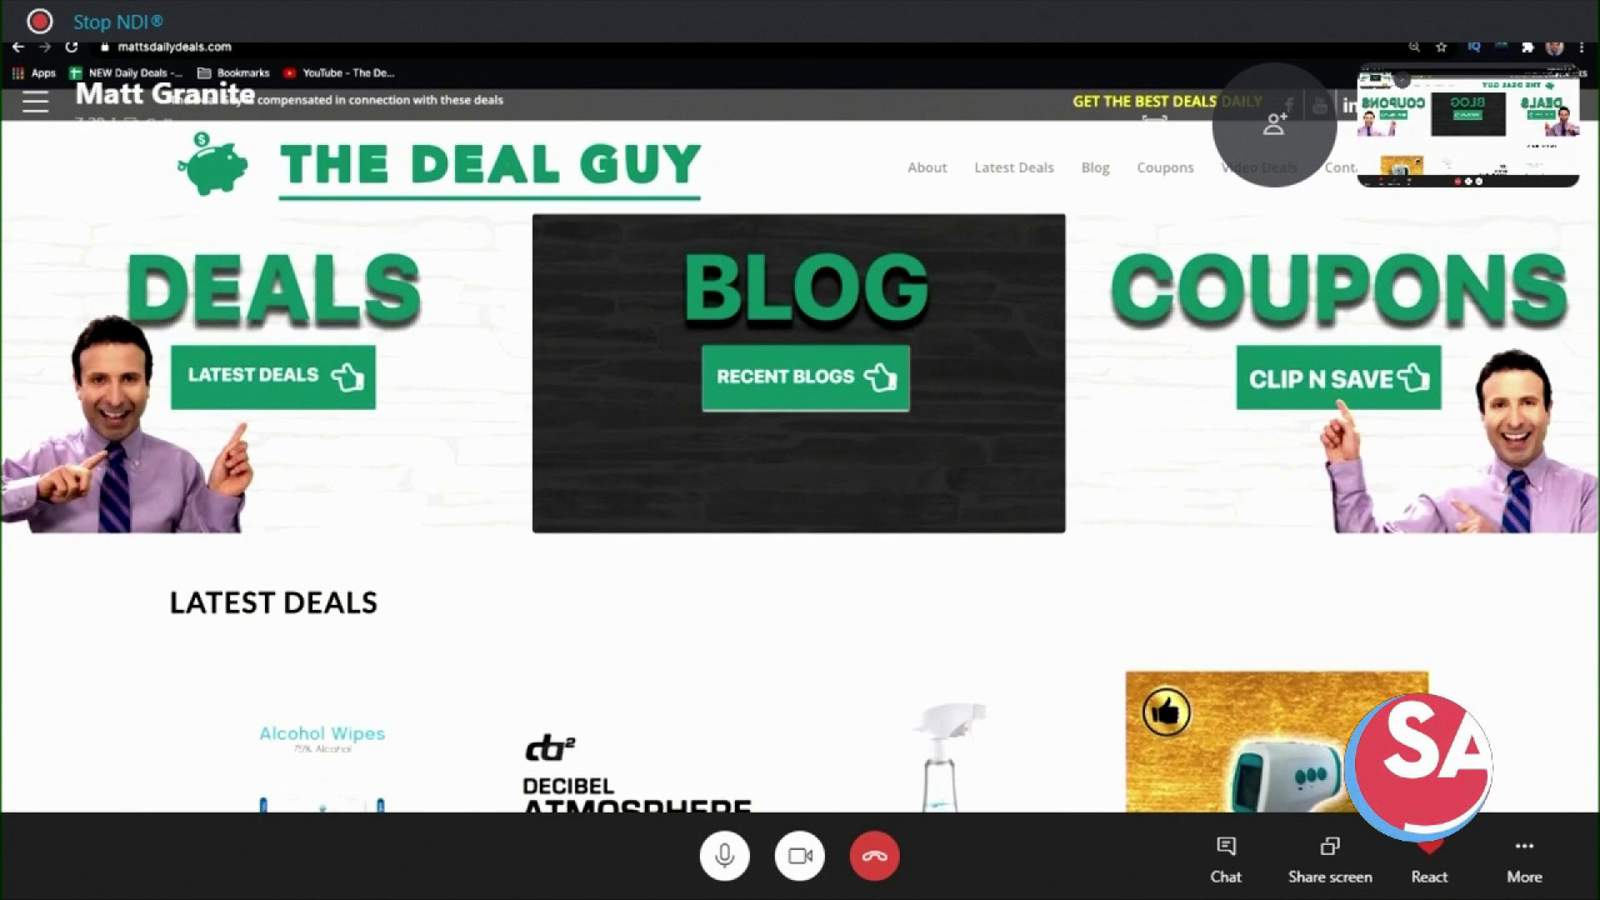 Find great discounts this Labor Day weekend with The Deal Guy